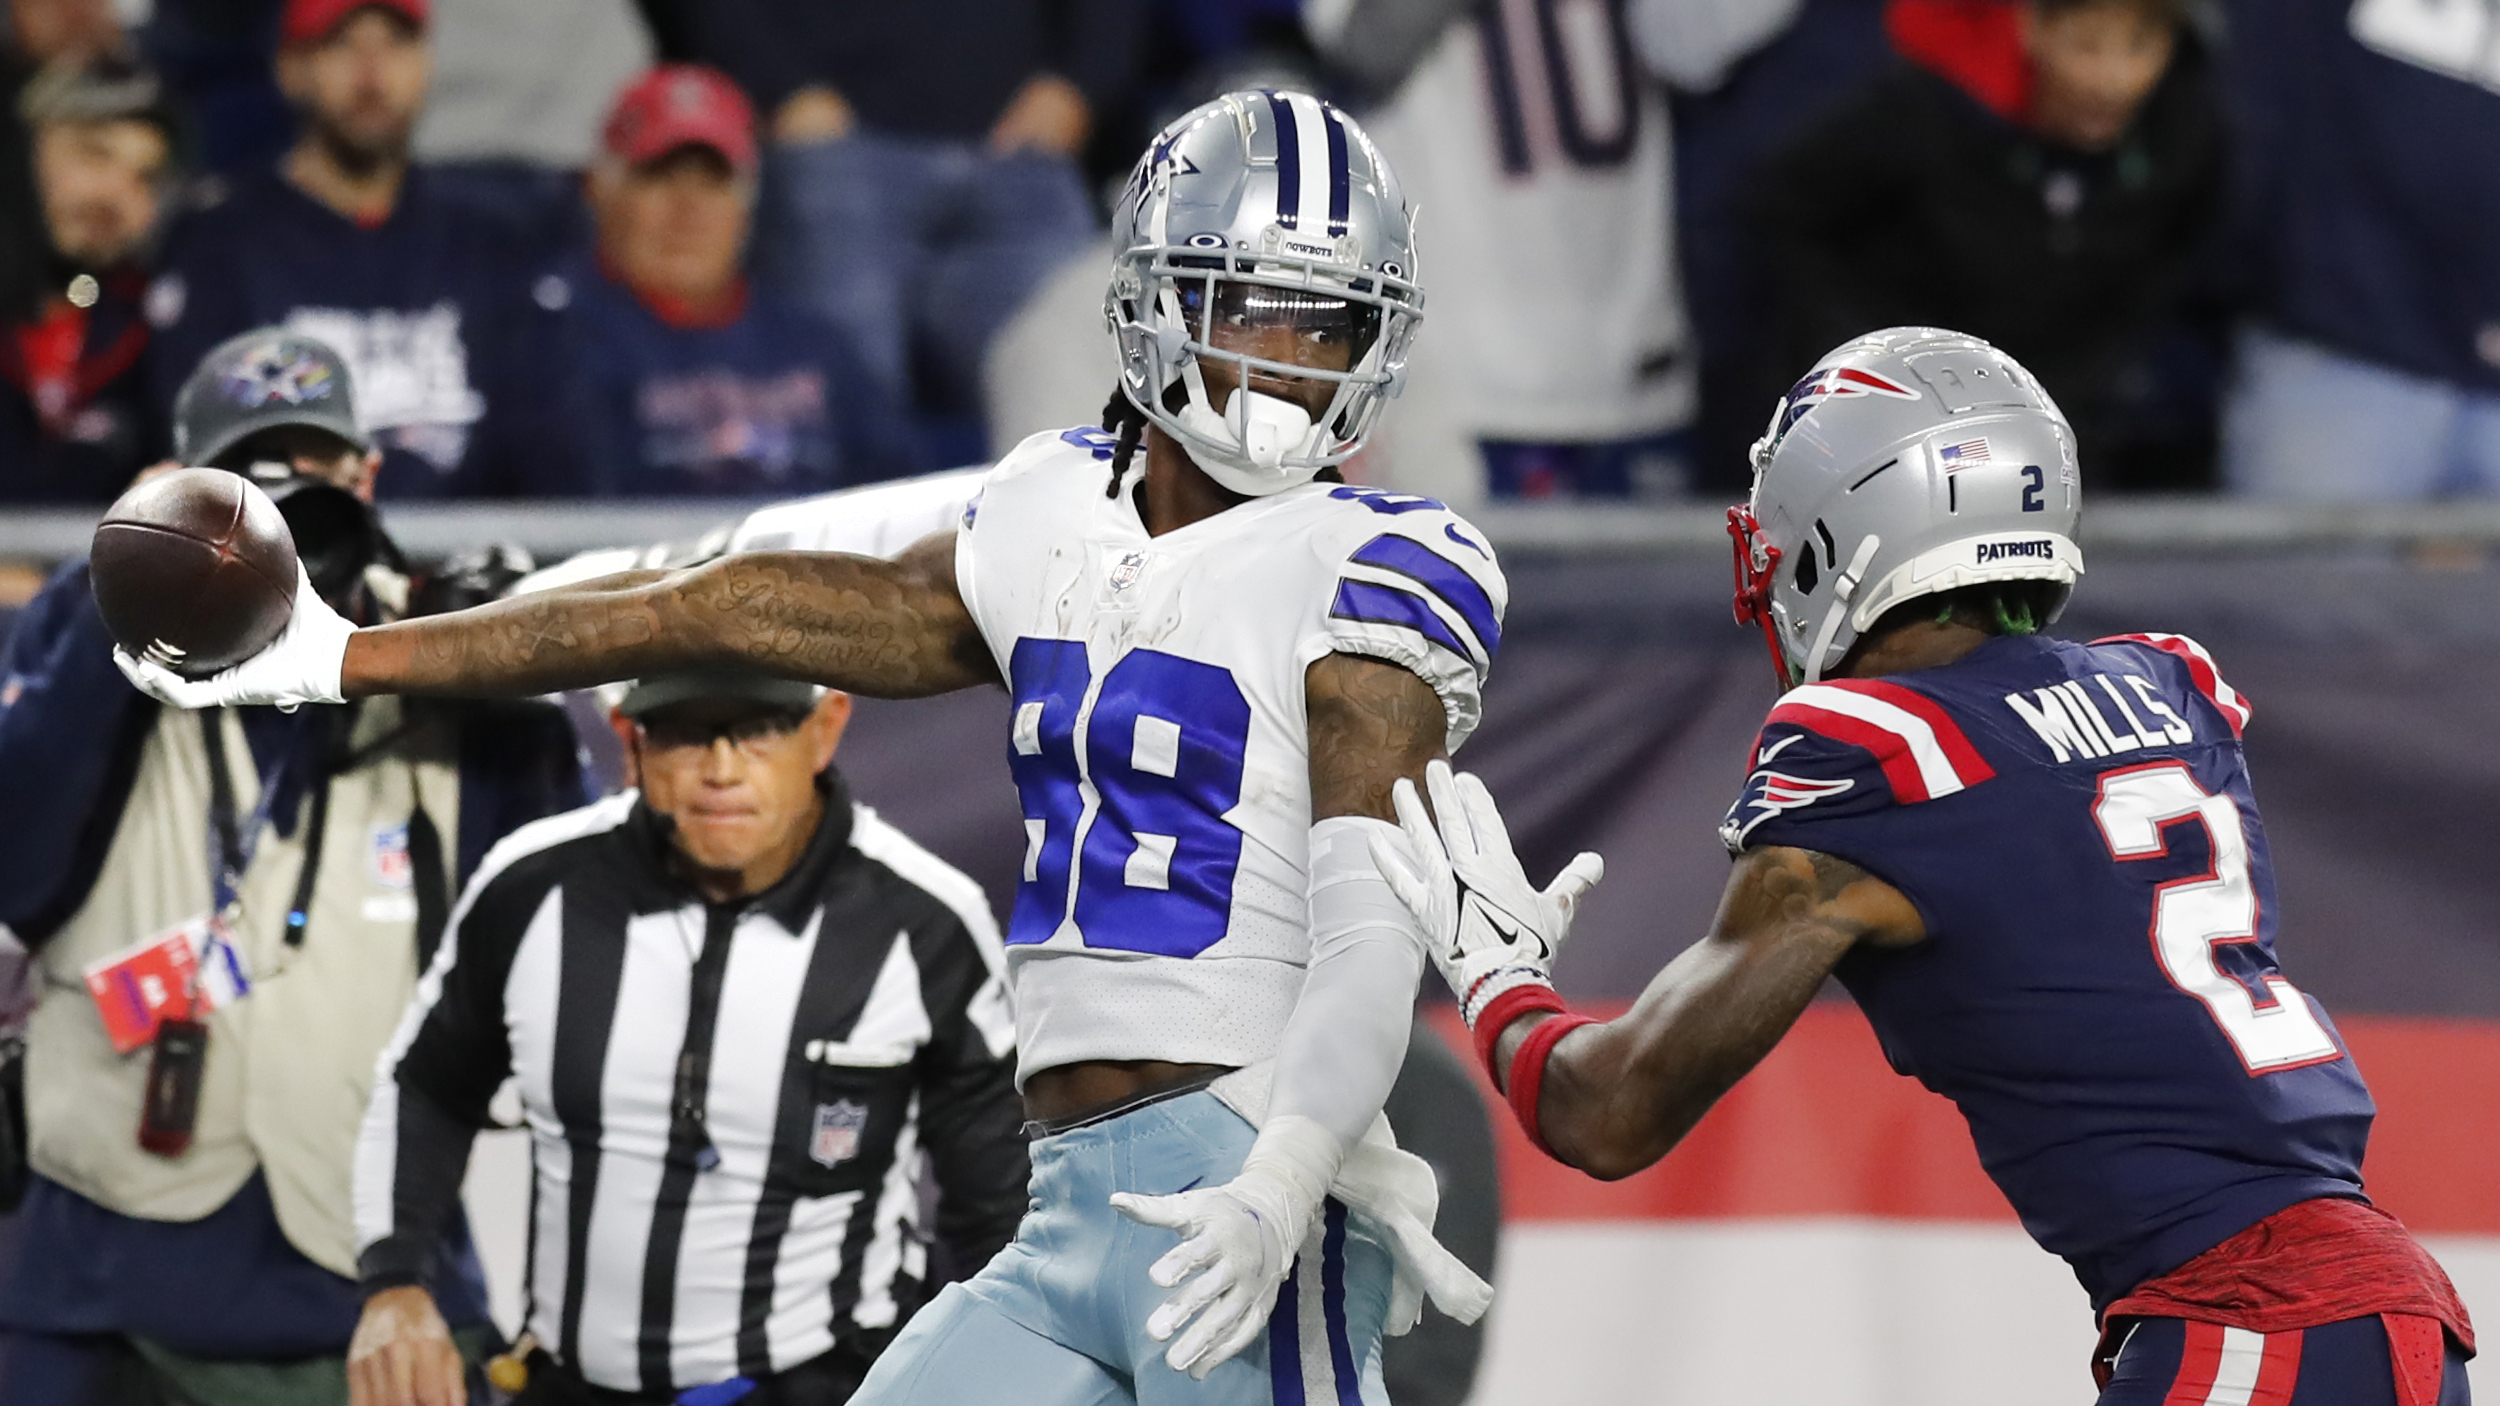 LOOK: Cowboys' score 2 TDs in 3 drives with Prescott as play caller